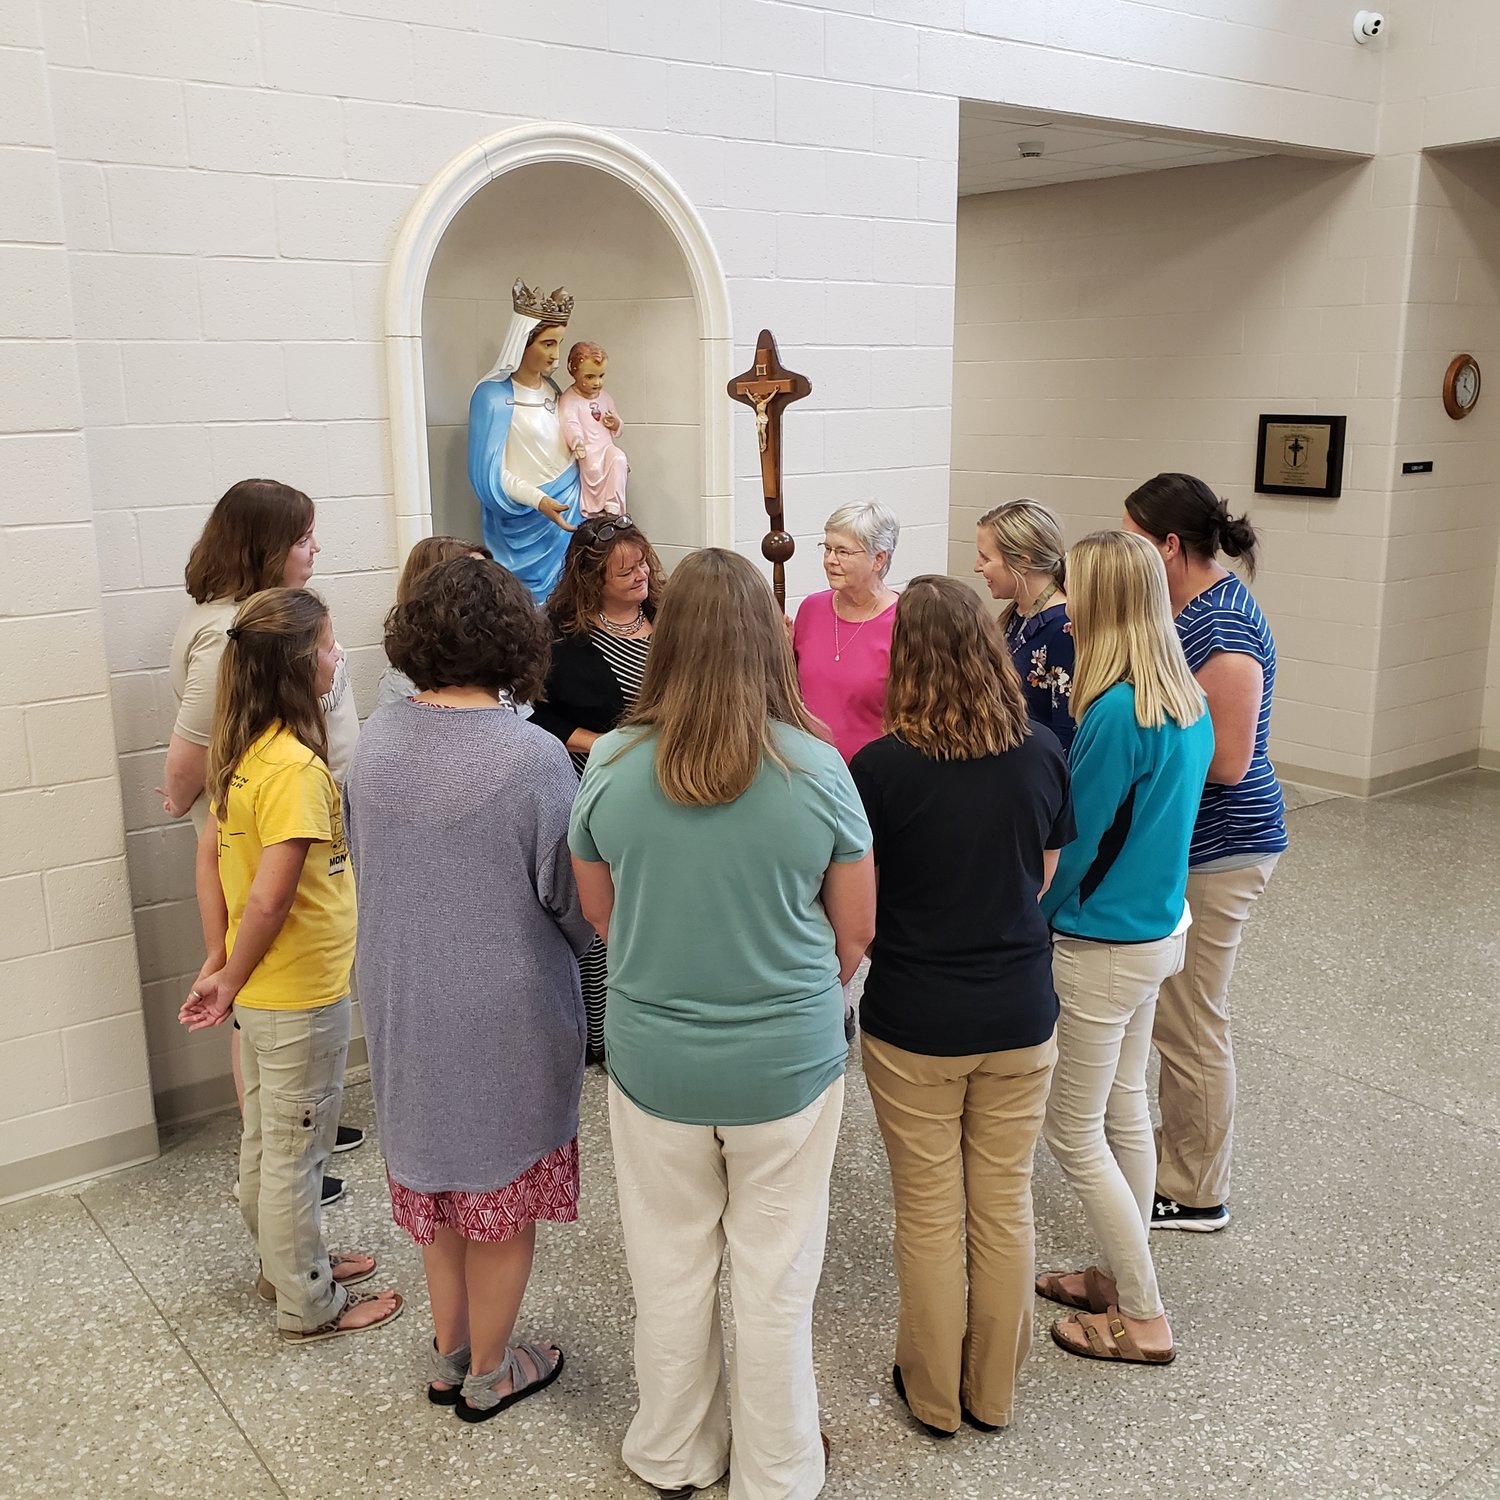 The faculty of Holy Rosary School in Monroe City gathers for prayer in the common area of the school on Sept. 28.